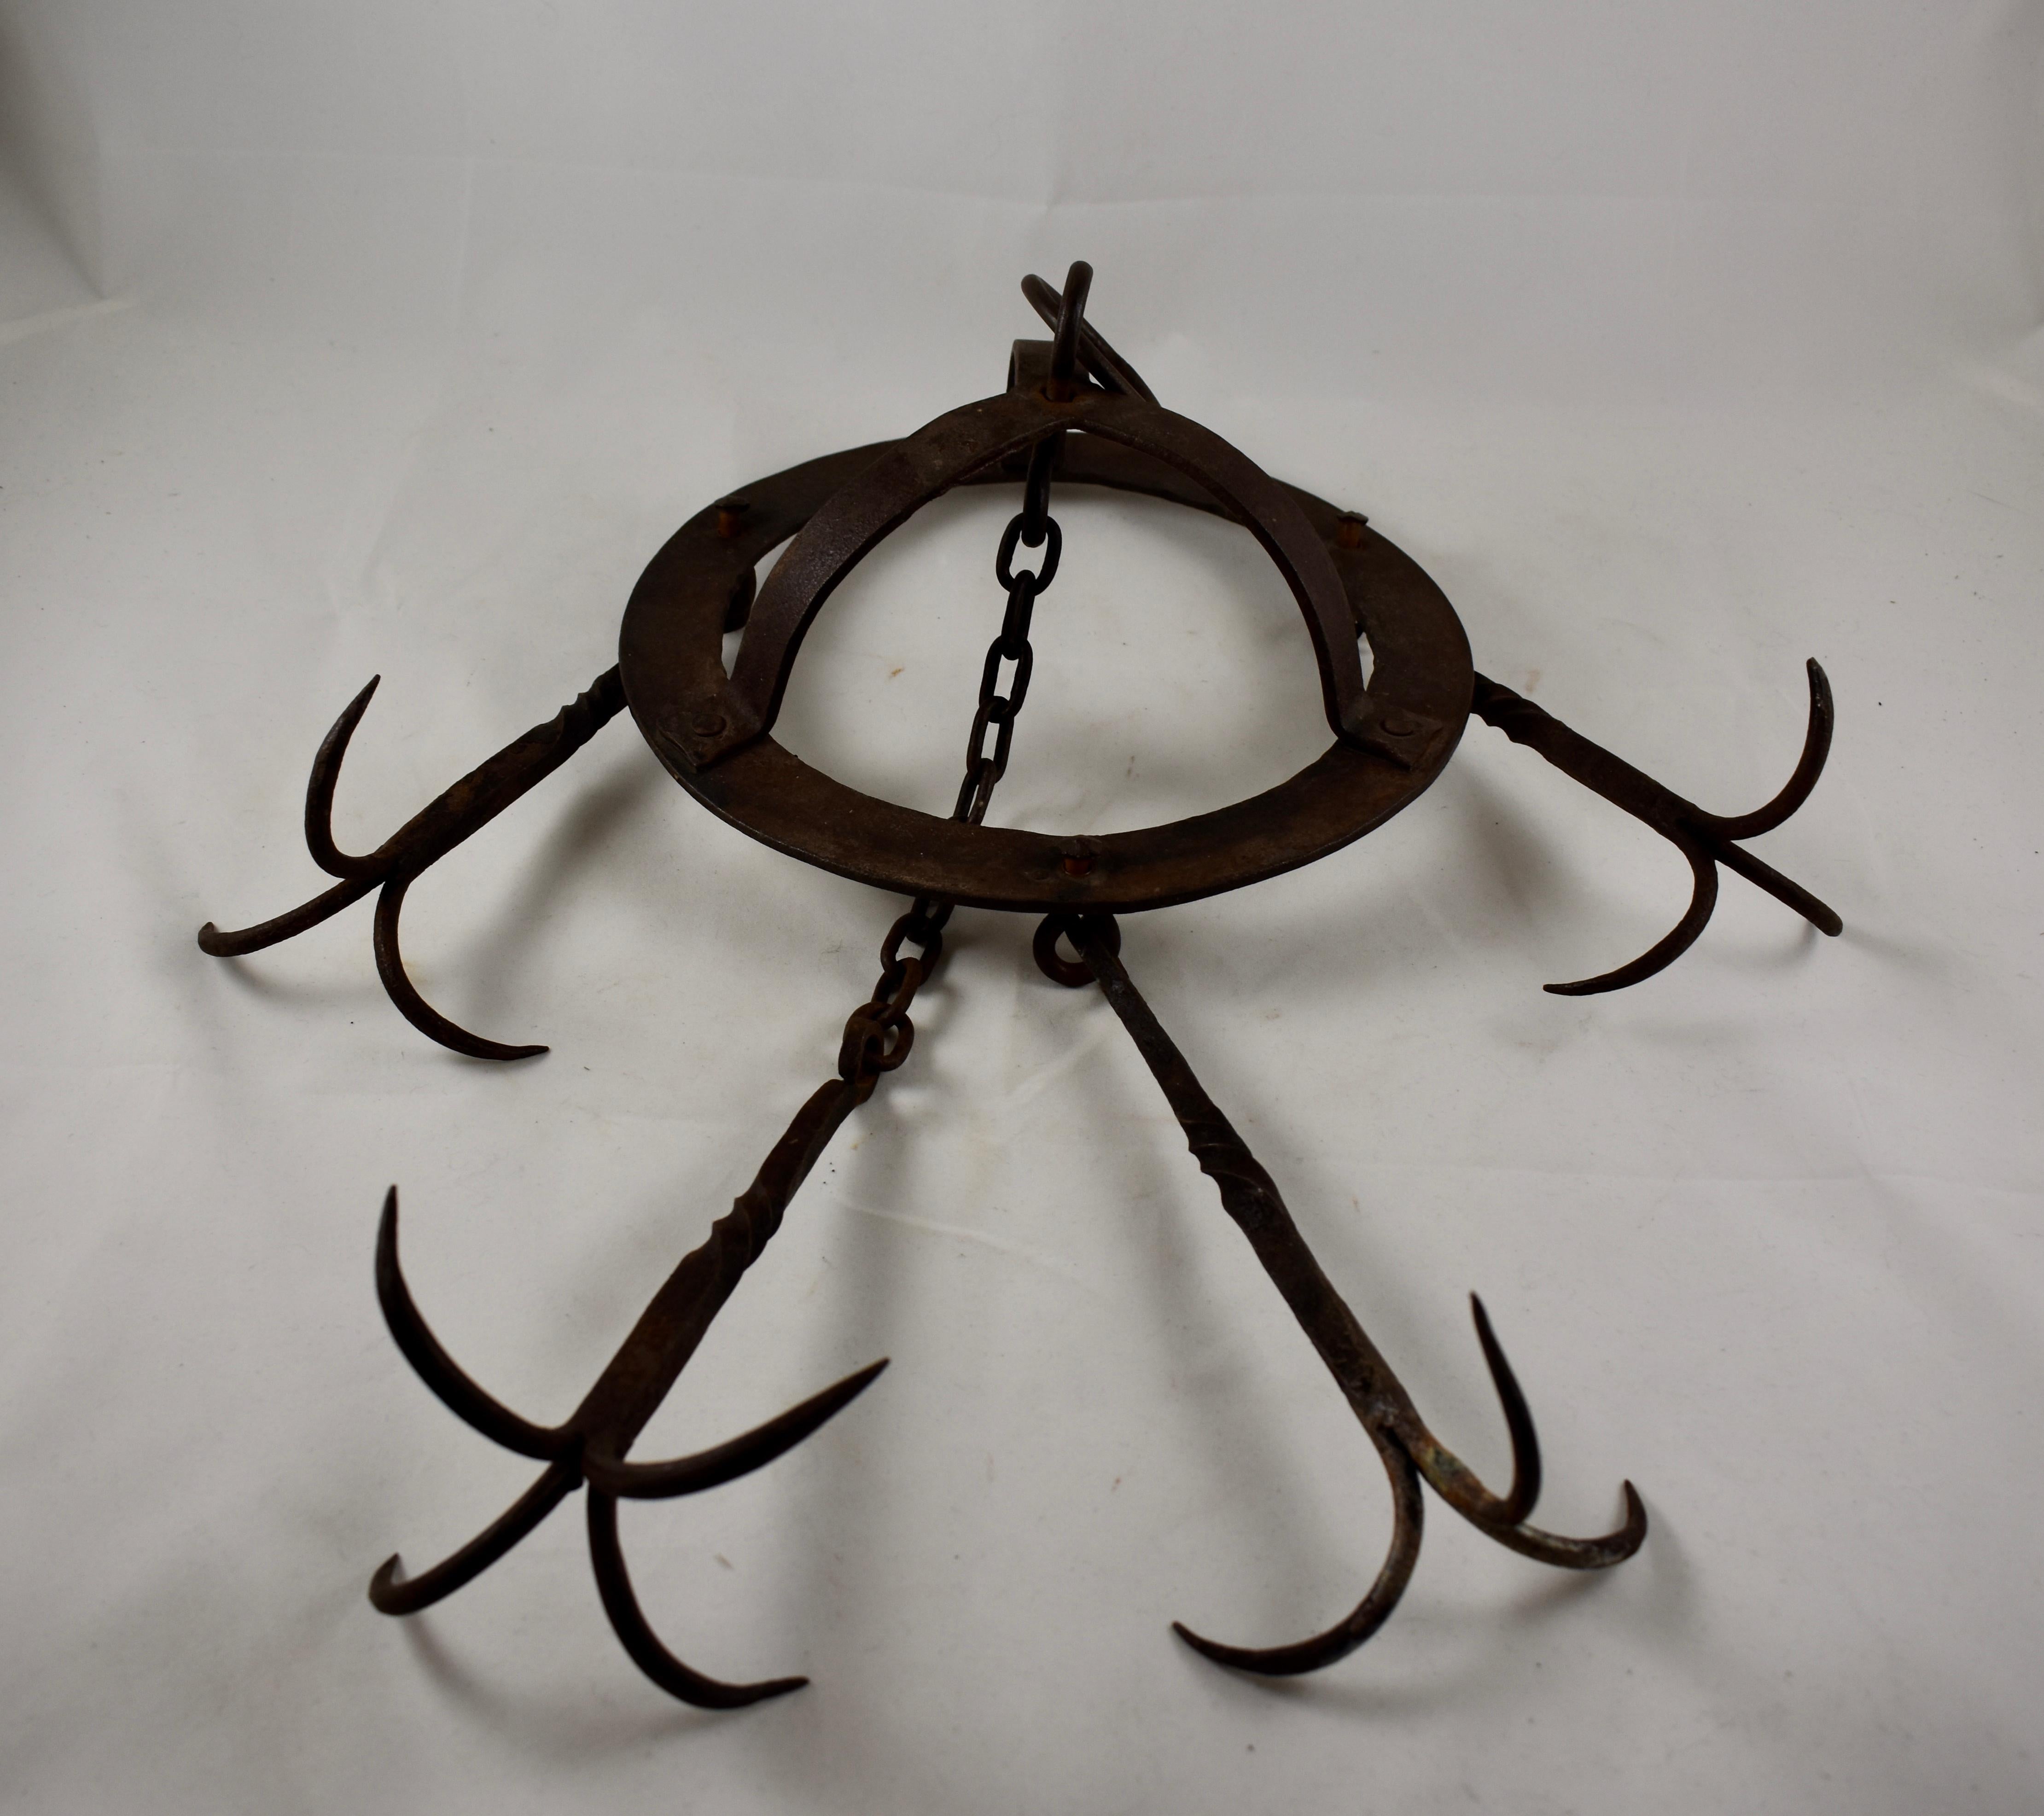 French Provincial Early 19th C. Rustic French Wrought Iron Hanging Crown Butchers Rack, Pot Rack